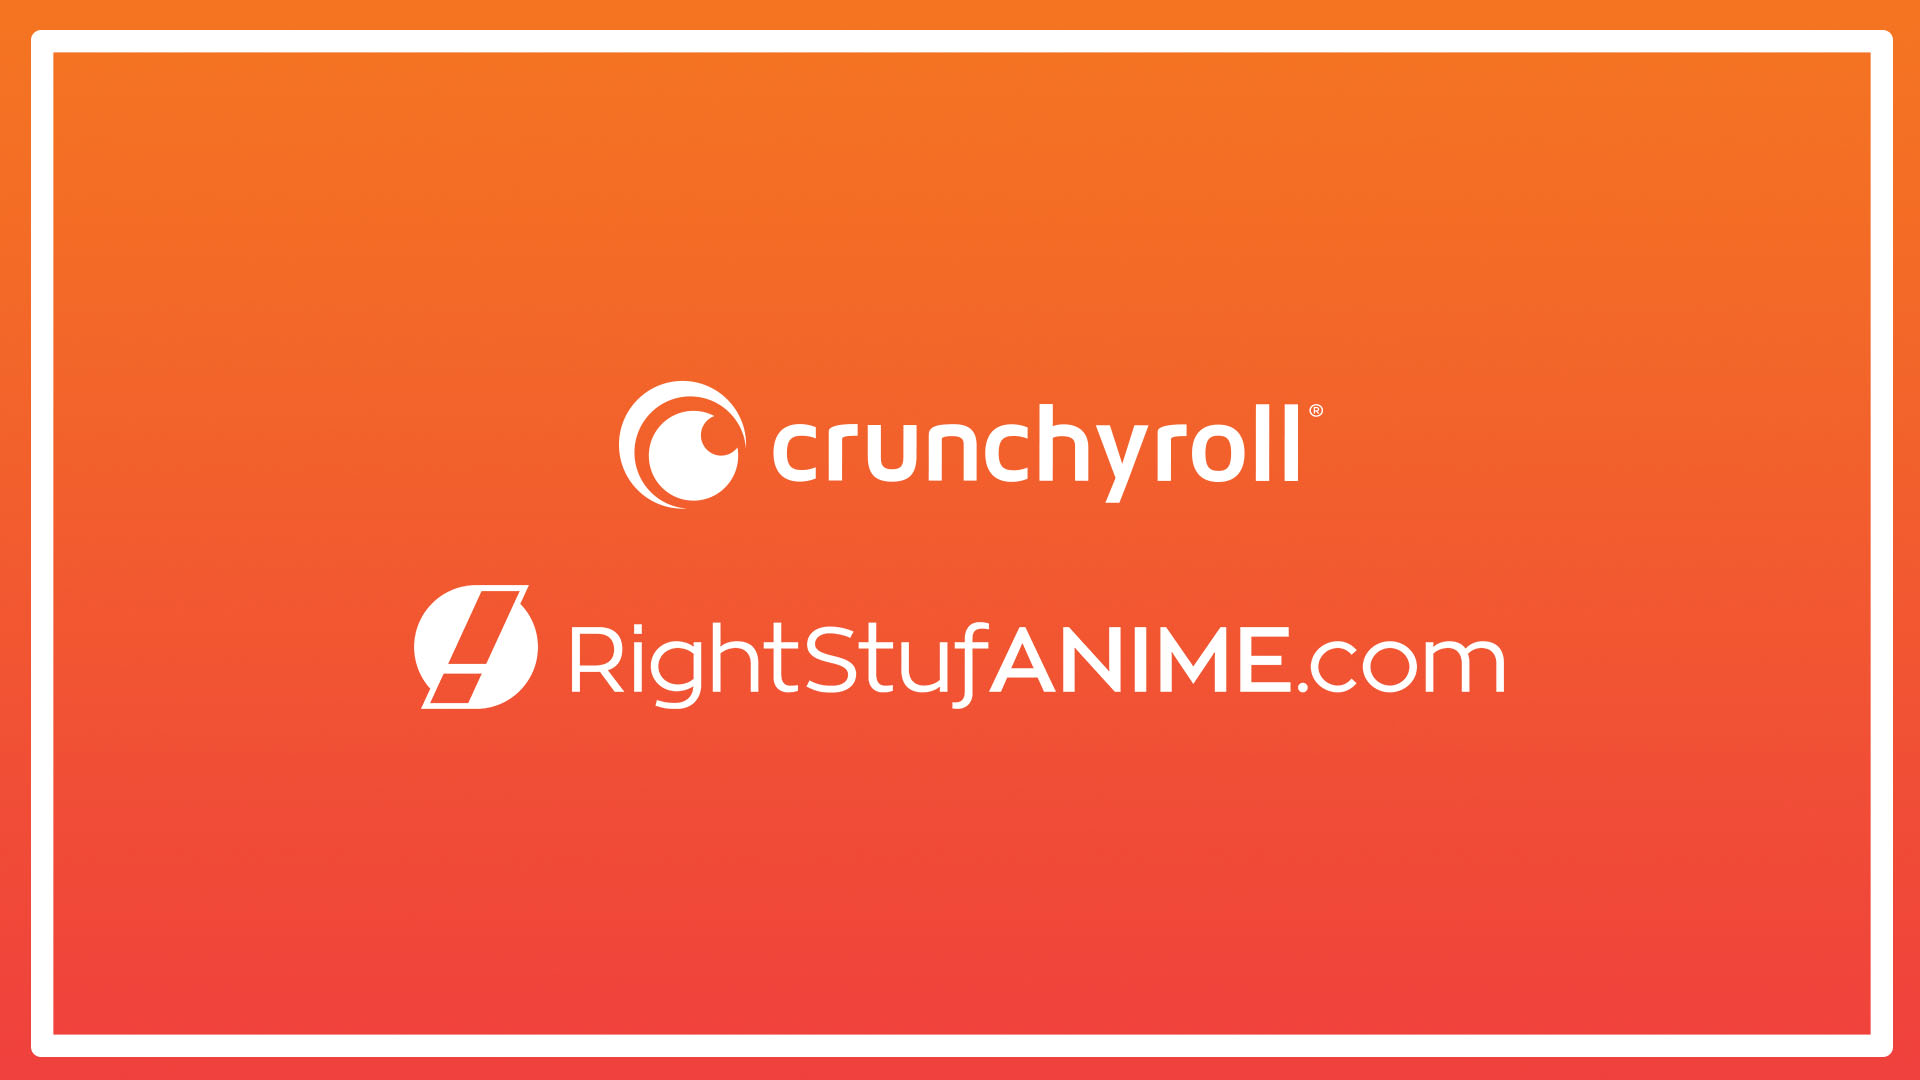 an orange image with the following text on it: Crunchyroll RightStufAnime.com